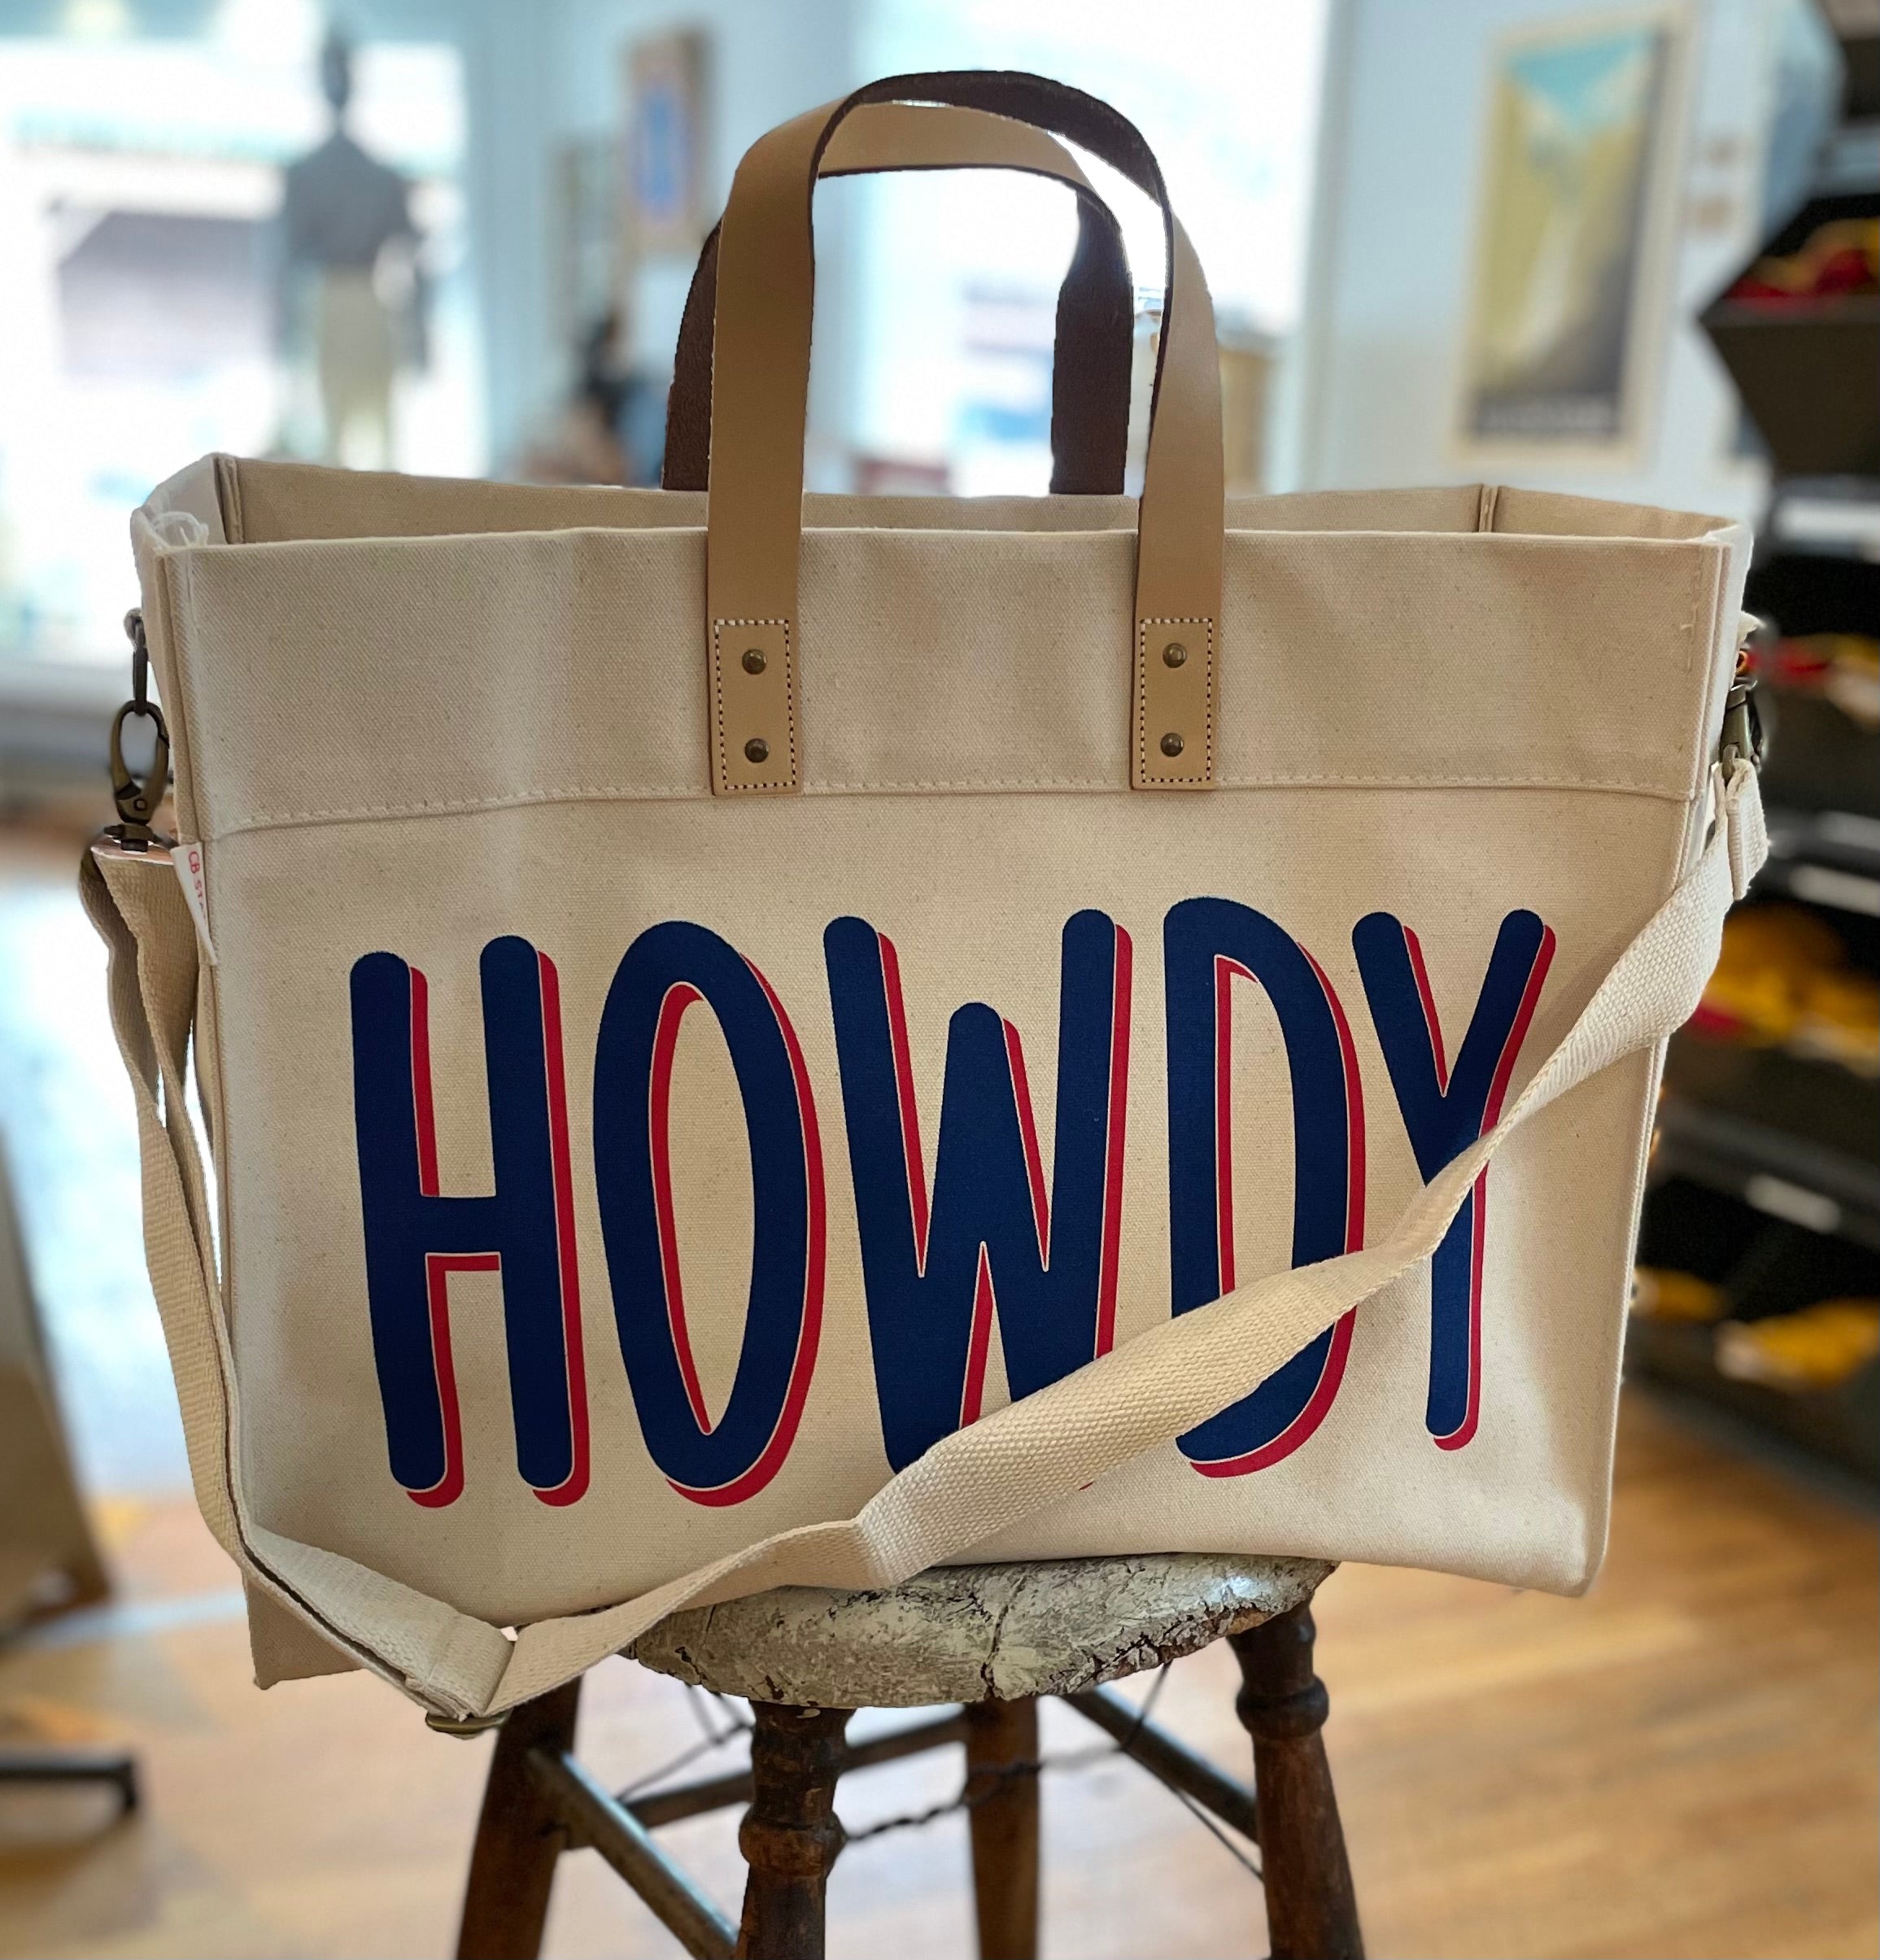 Howdy Tote - Blue and Red Drop Shadow